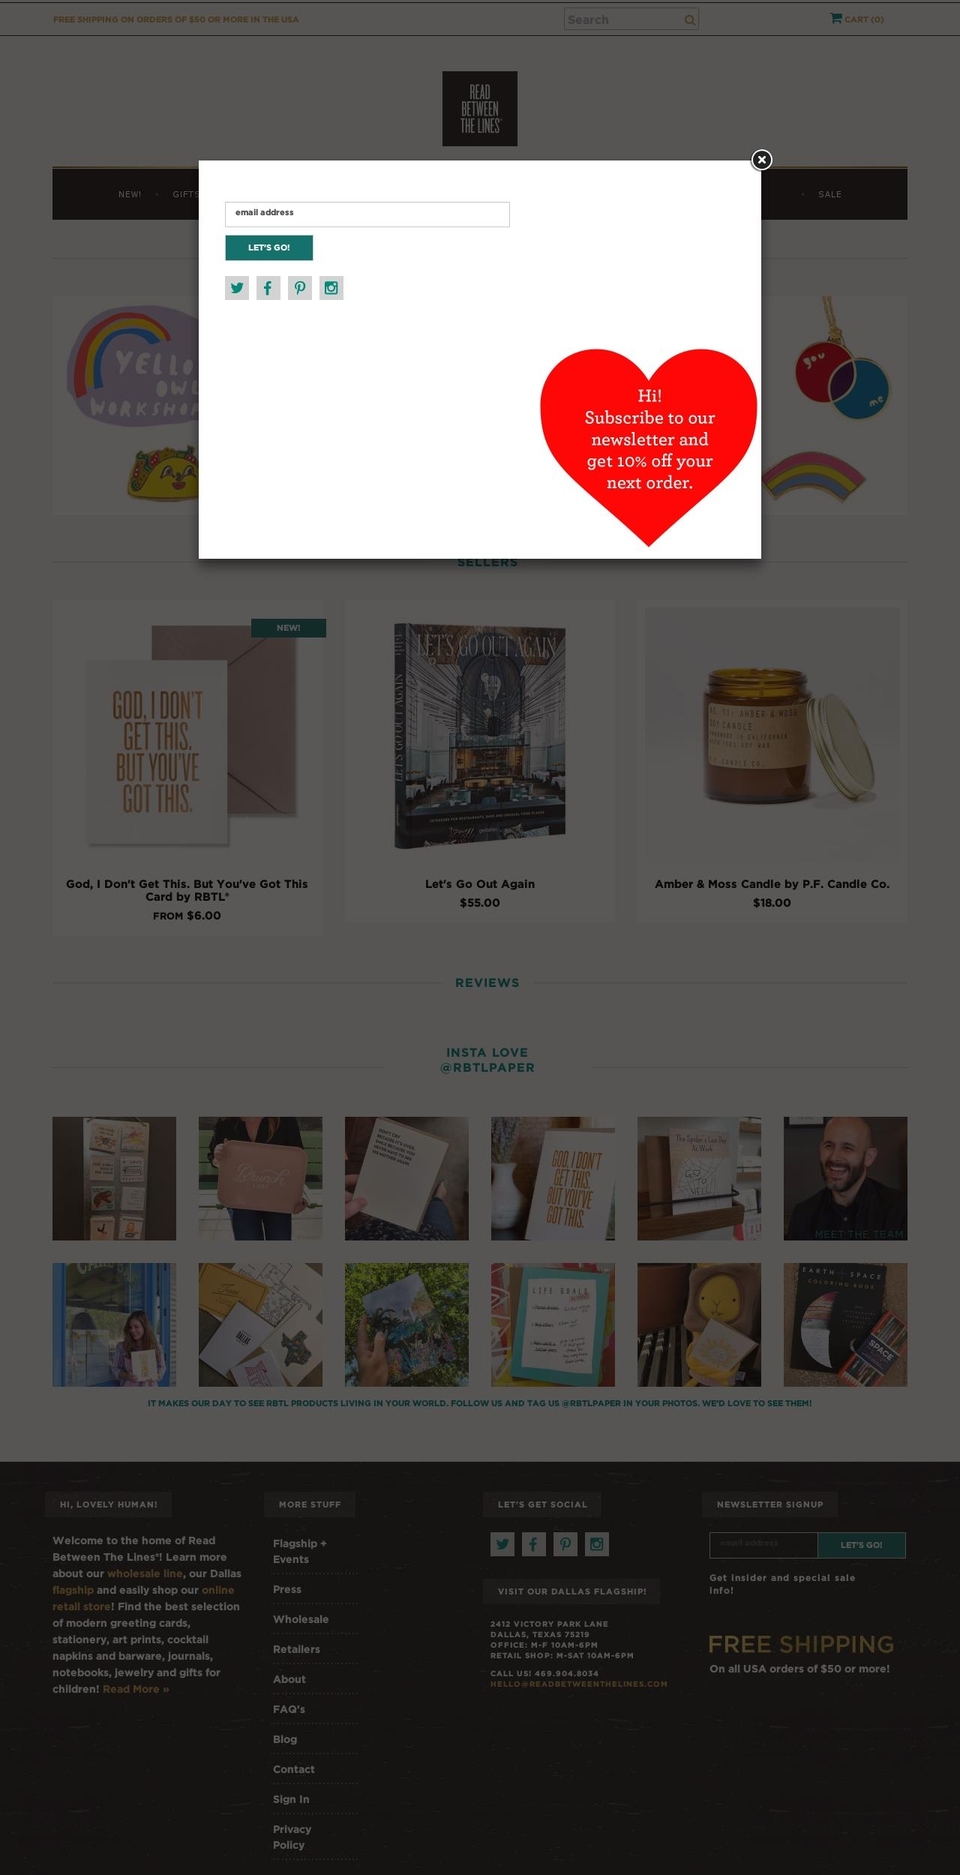 Envy Shopify theme site example readbetweenthelines.com